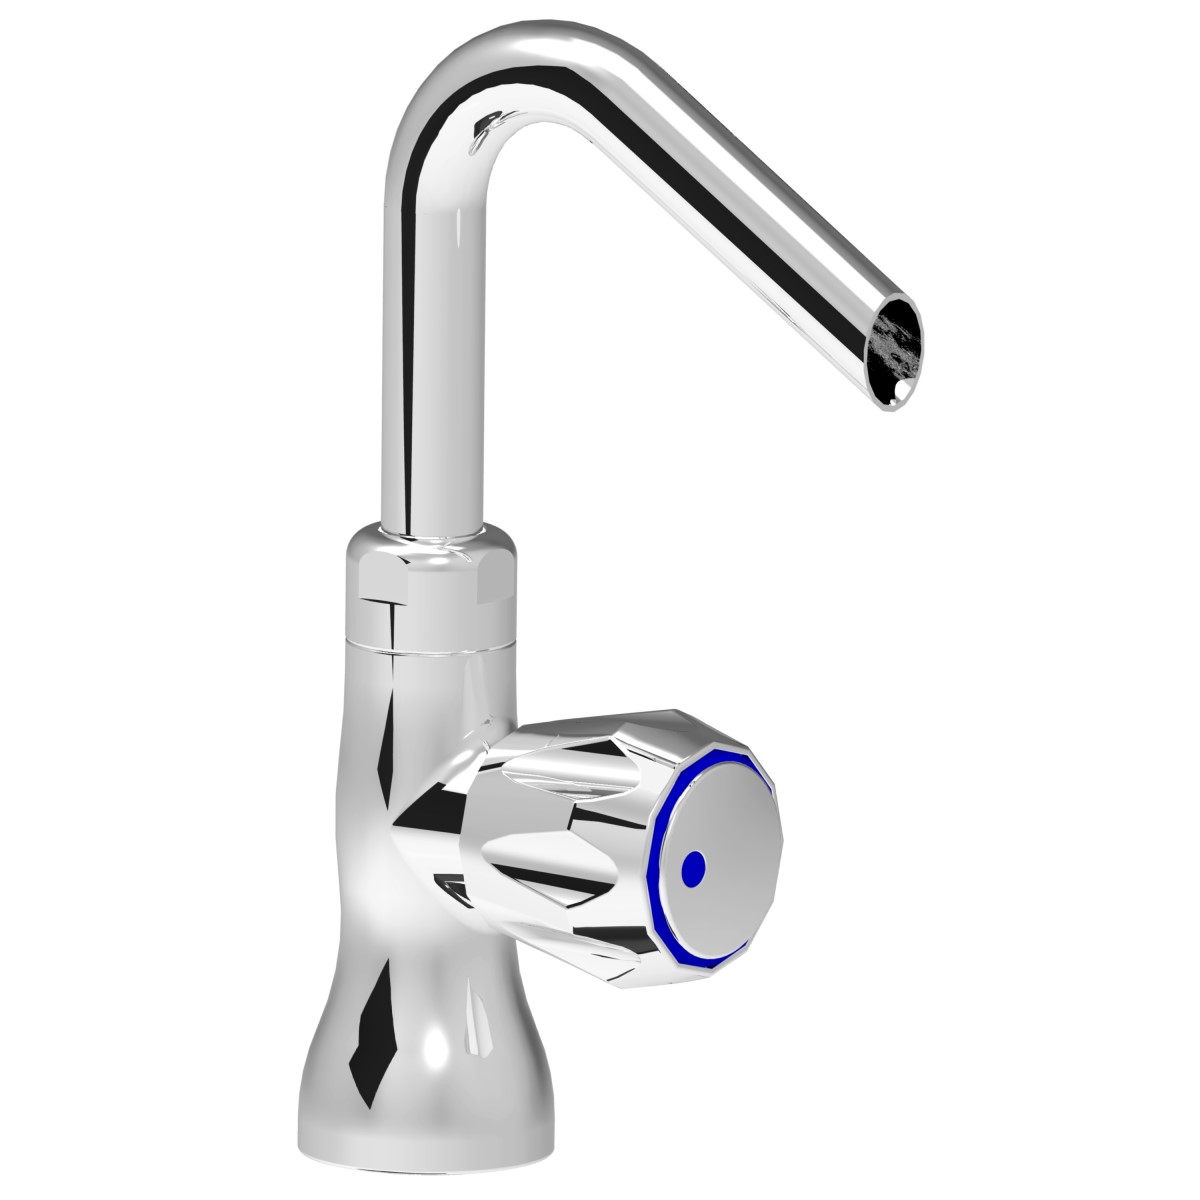 Vertical tap with filler spout